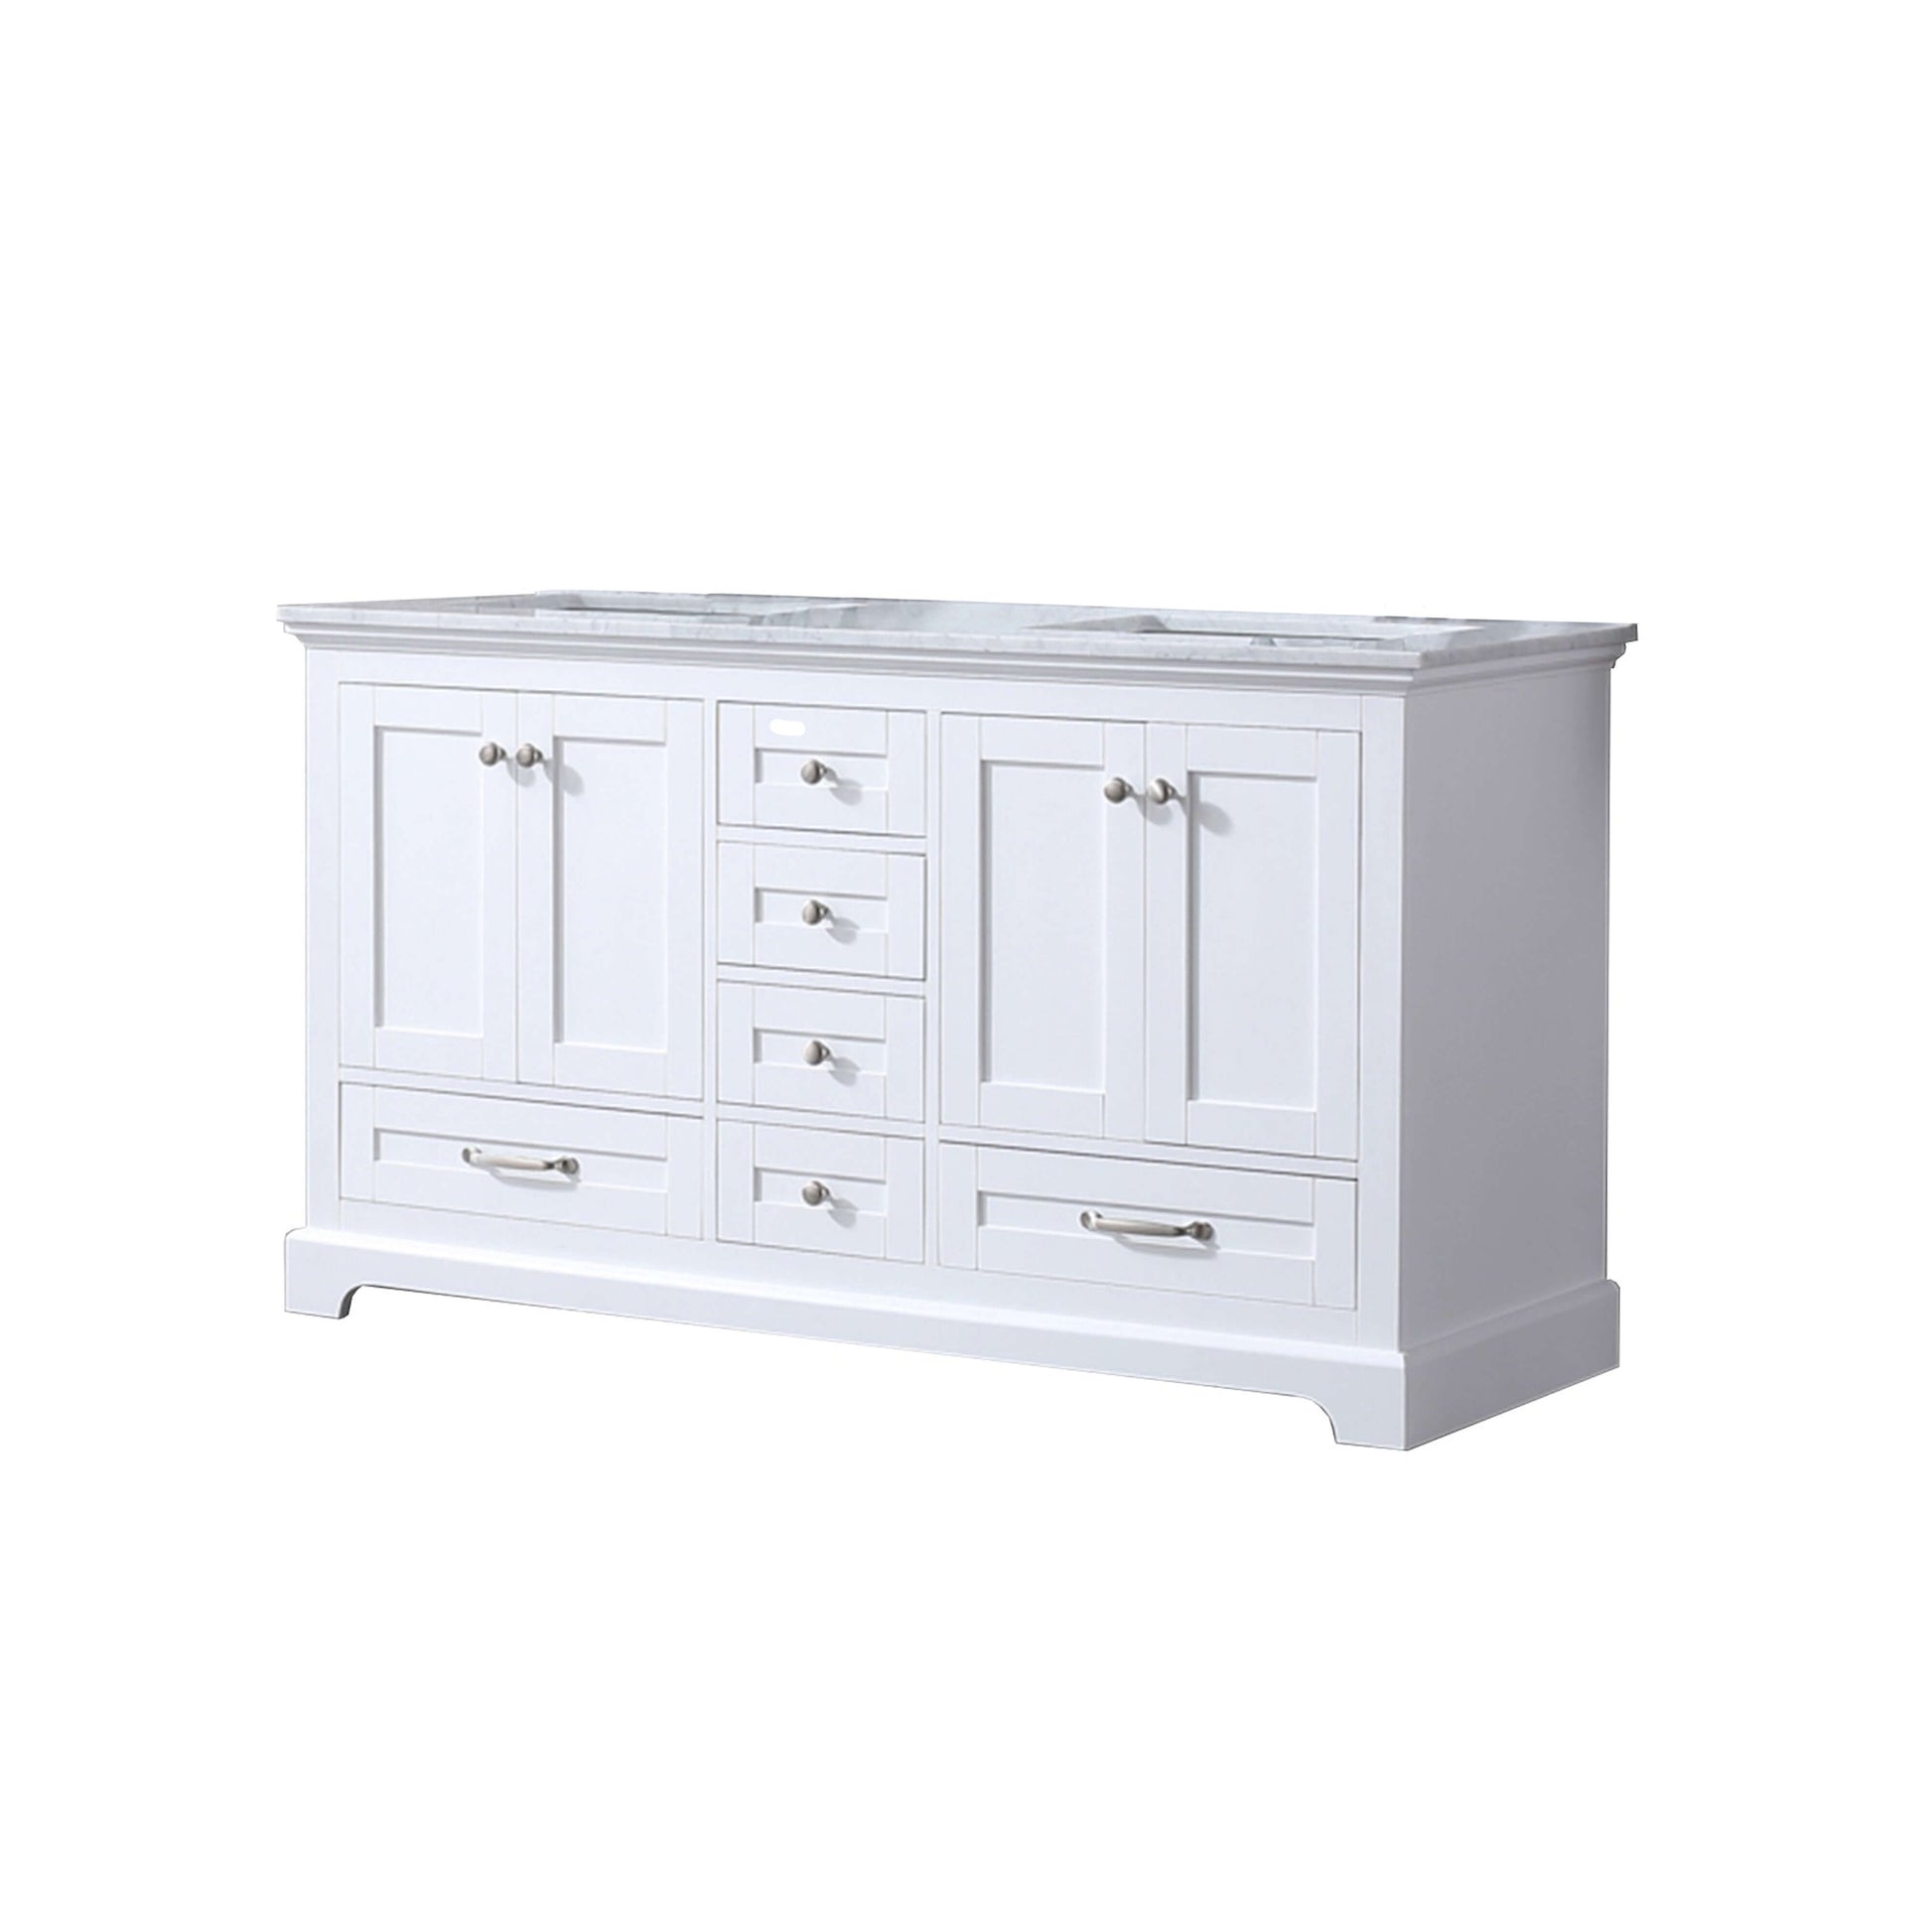 Dukes 60" White Double Vanity, White Carrara Marble Top, White Square Sinks and no Mirror - LD342260DADS000